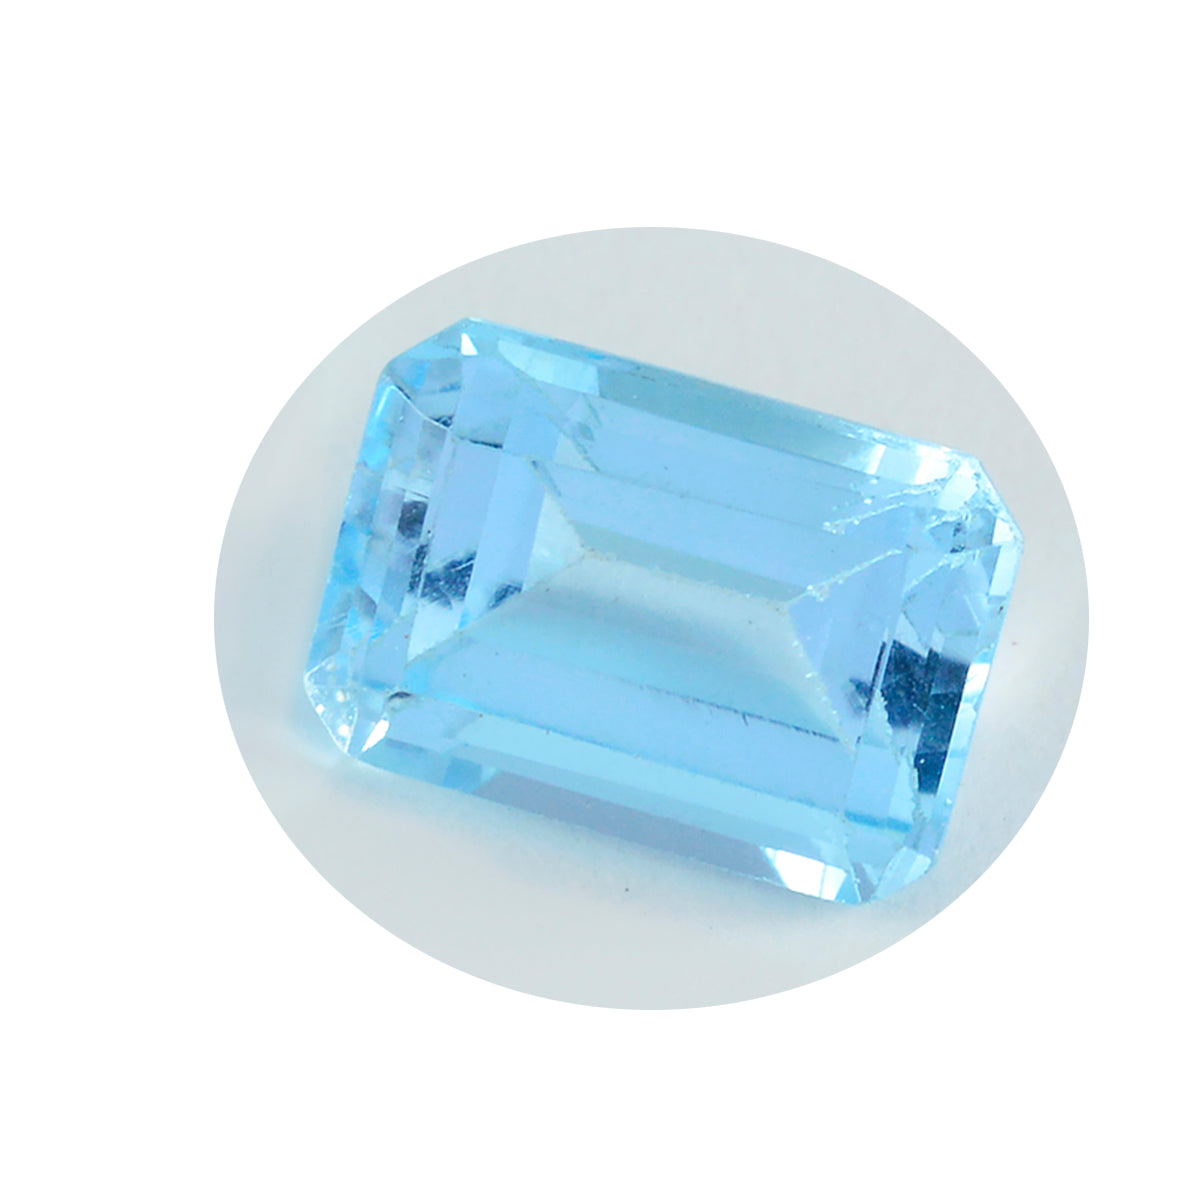 Riyogems 1PC Real Blue Topaz Faceted 12x16 mm Octagon Shape excellent Quality Loose Gemstone